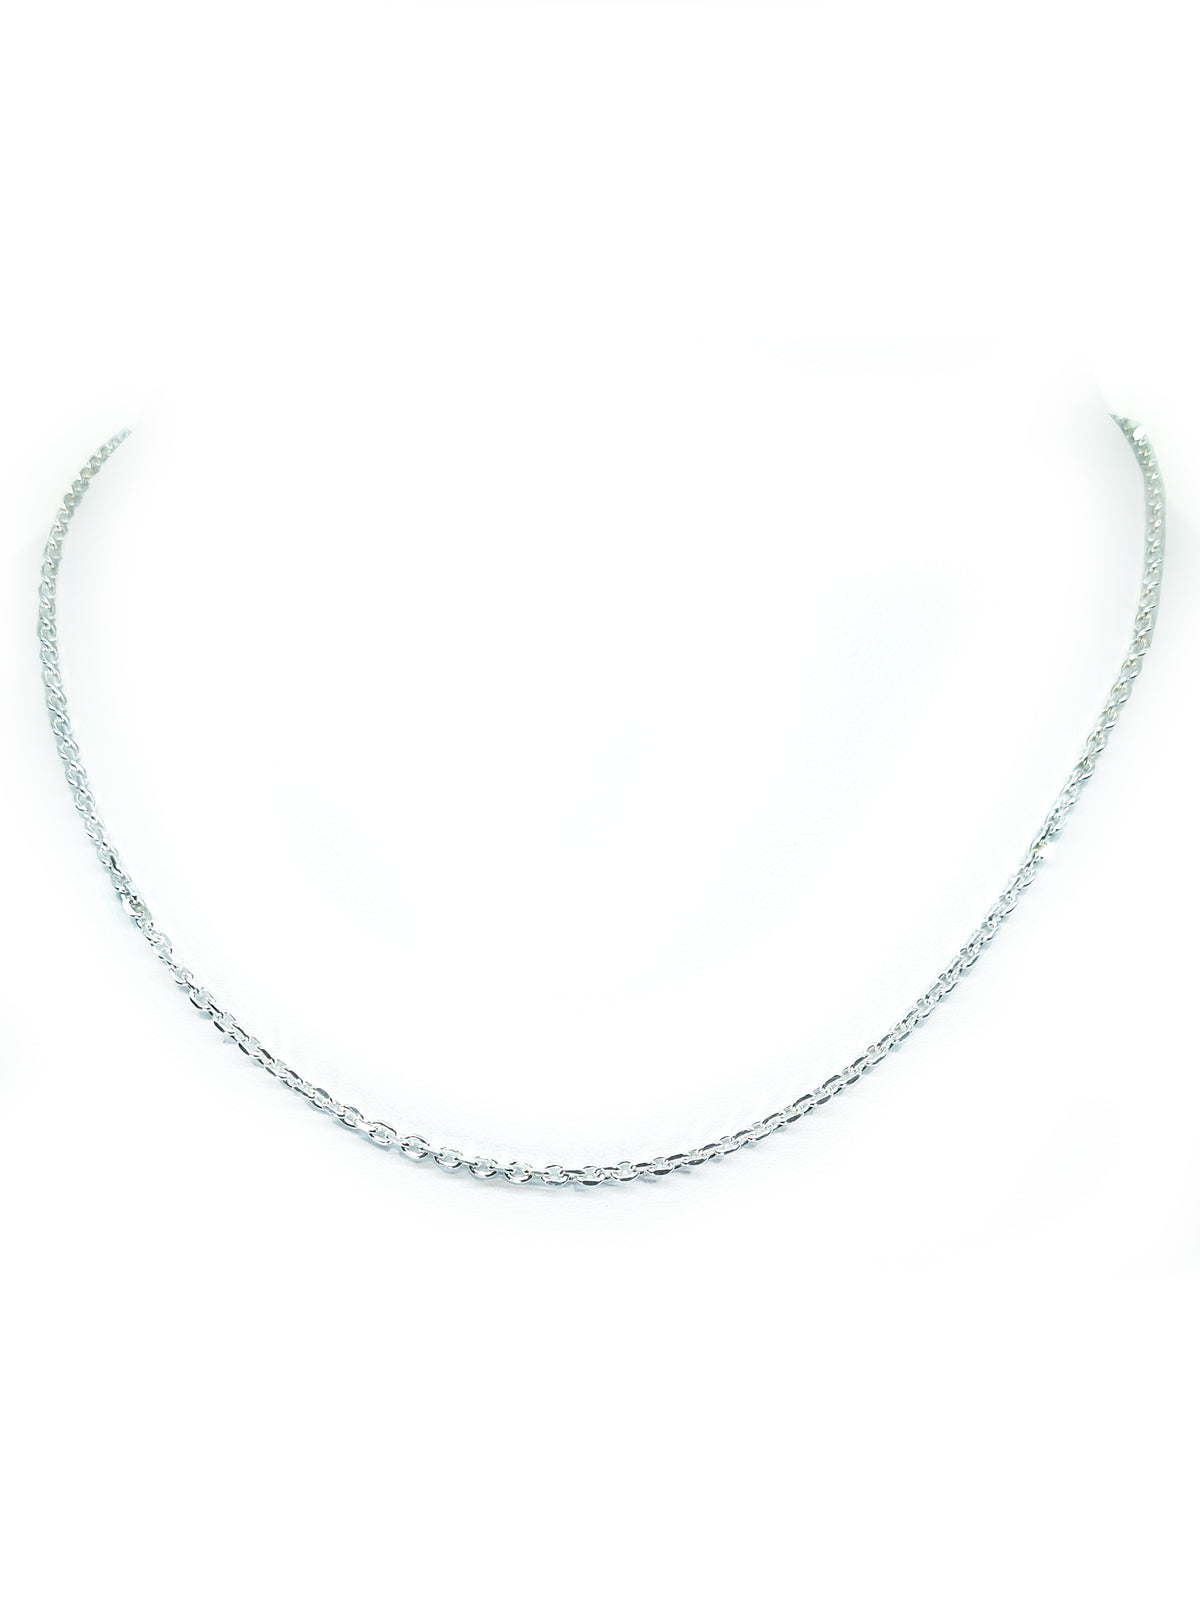 Cable Link Chain 1.5mm (Silver)